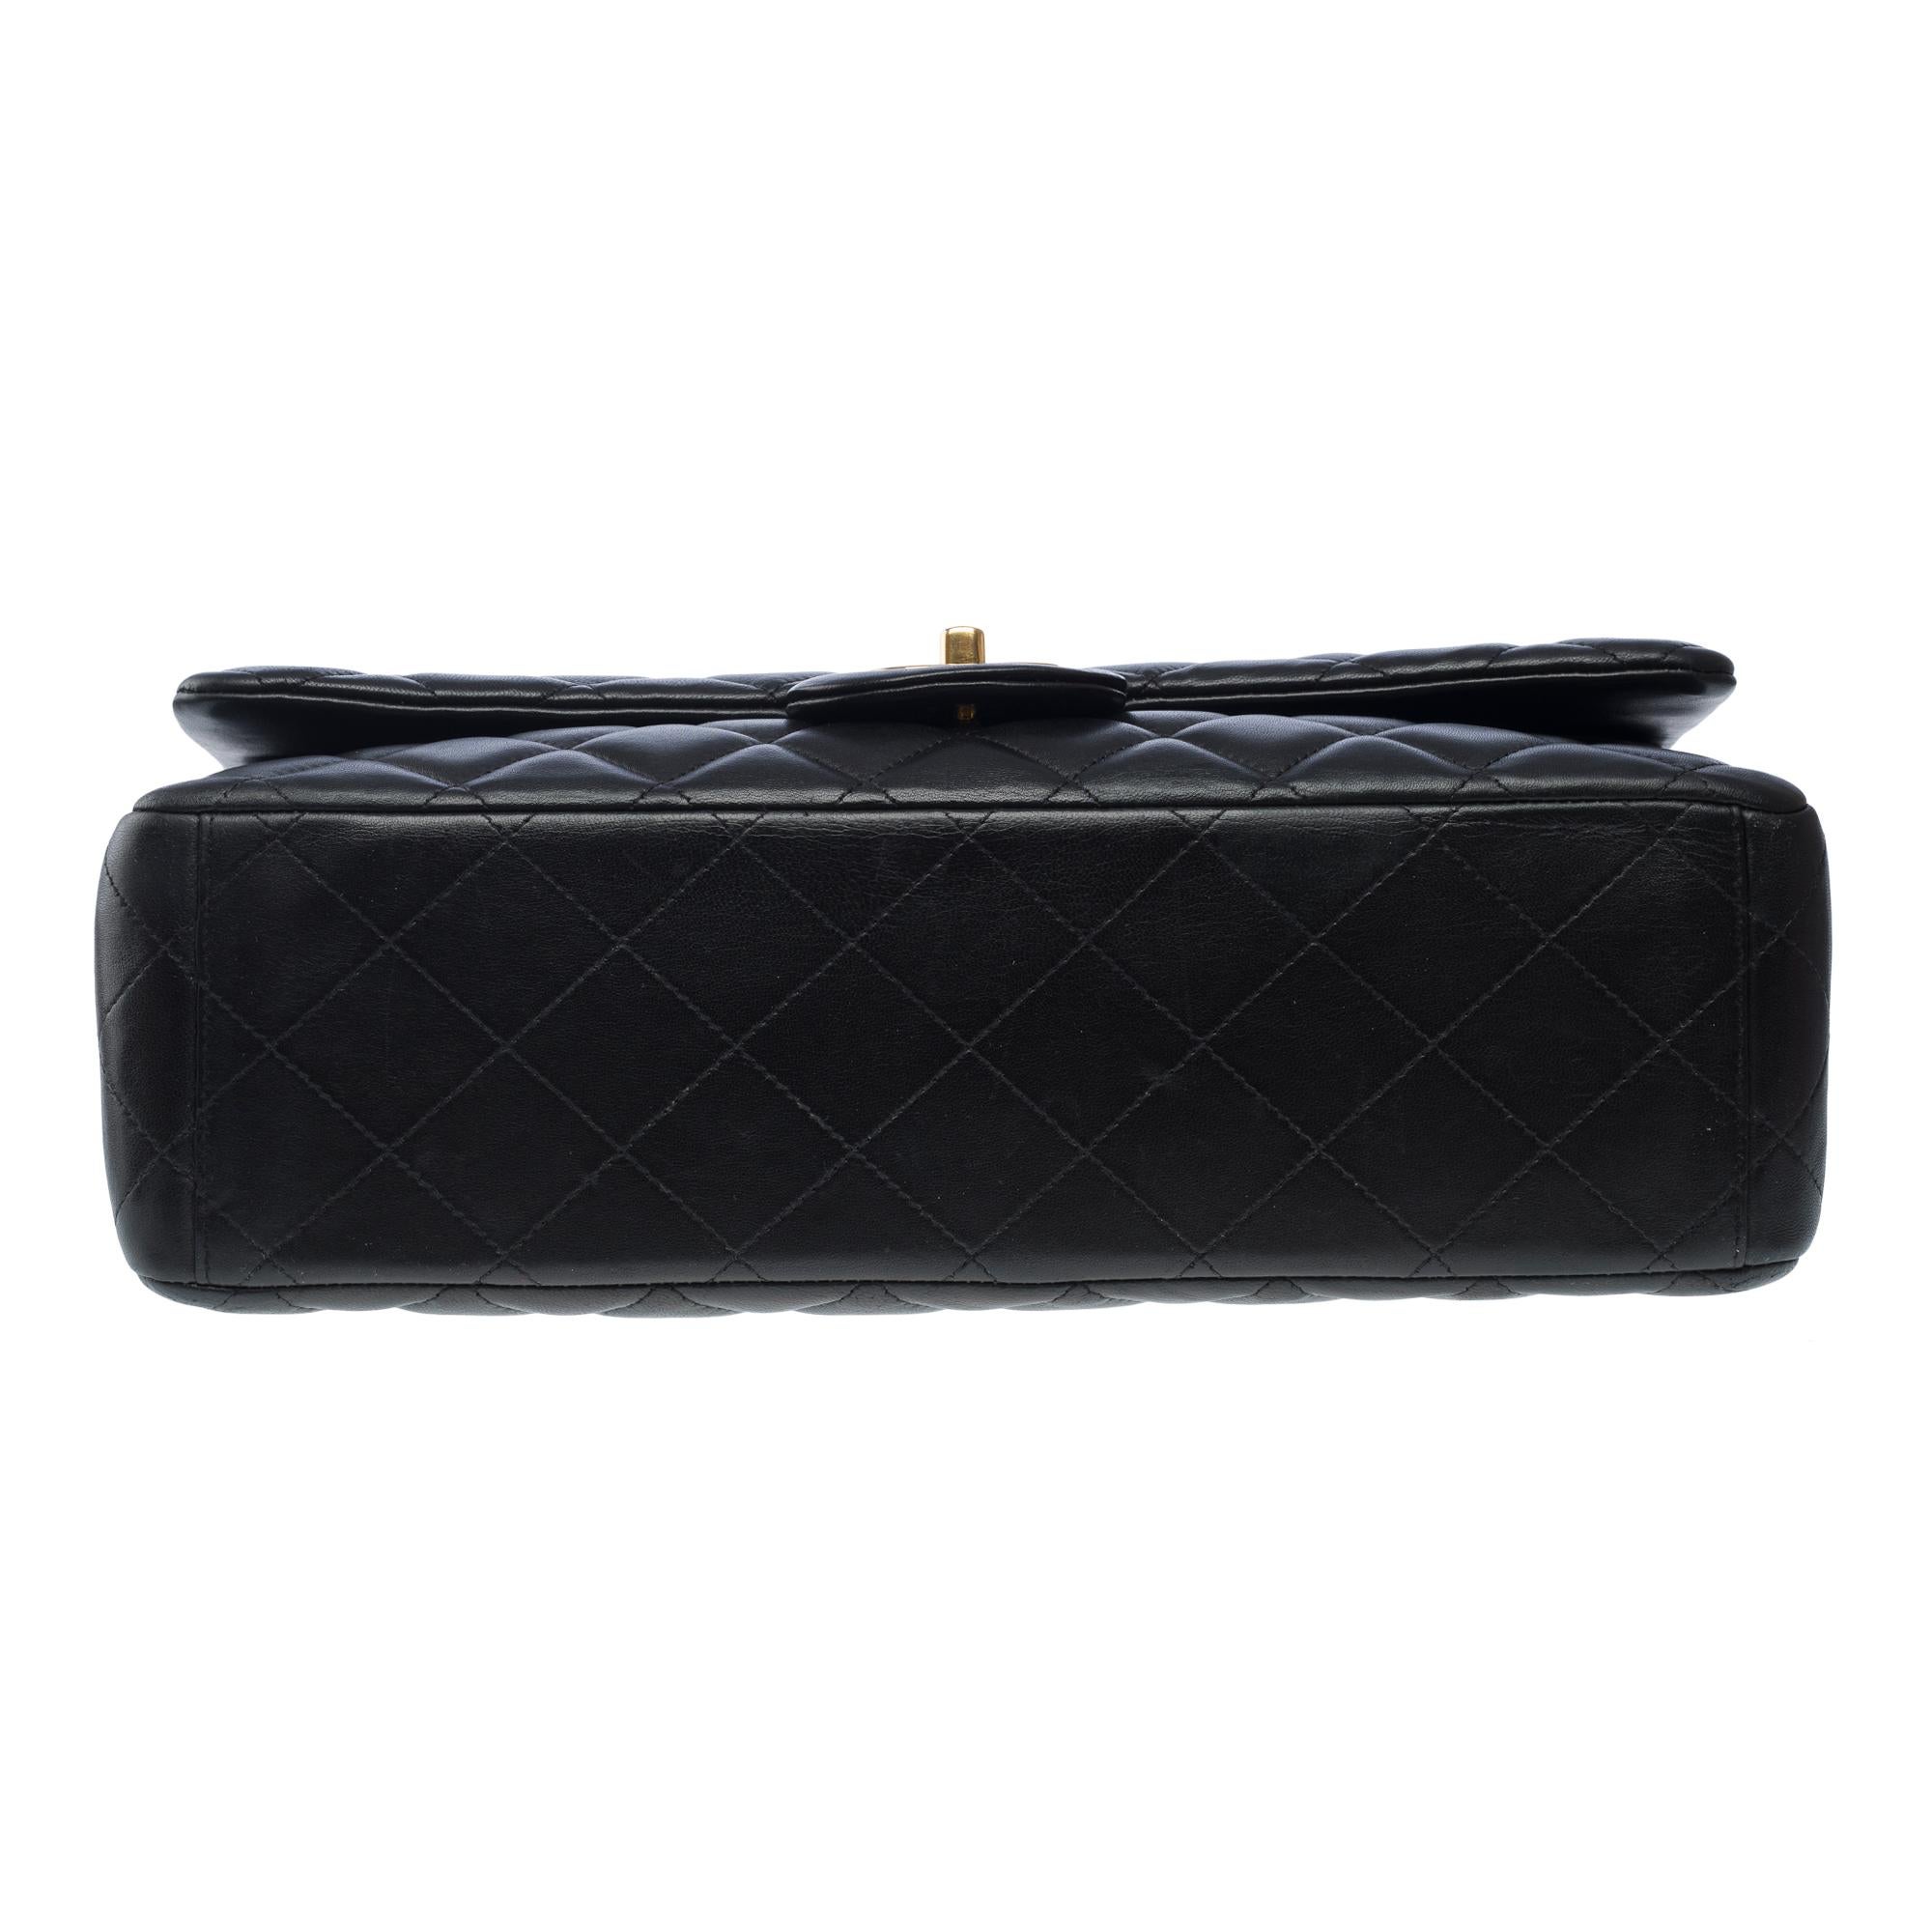 Chanel Timeless Maxi Jumbo double flap shoulder bag in Black quilted lamb, GHW For Sale 7